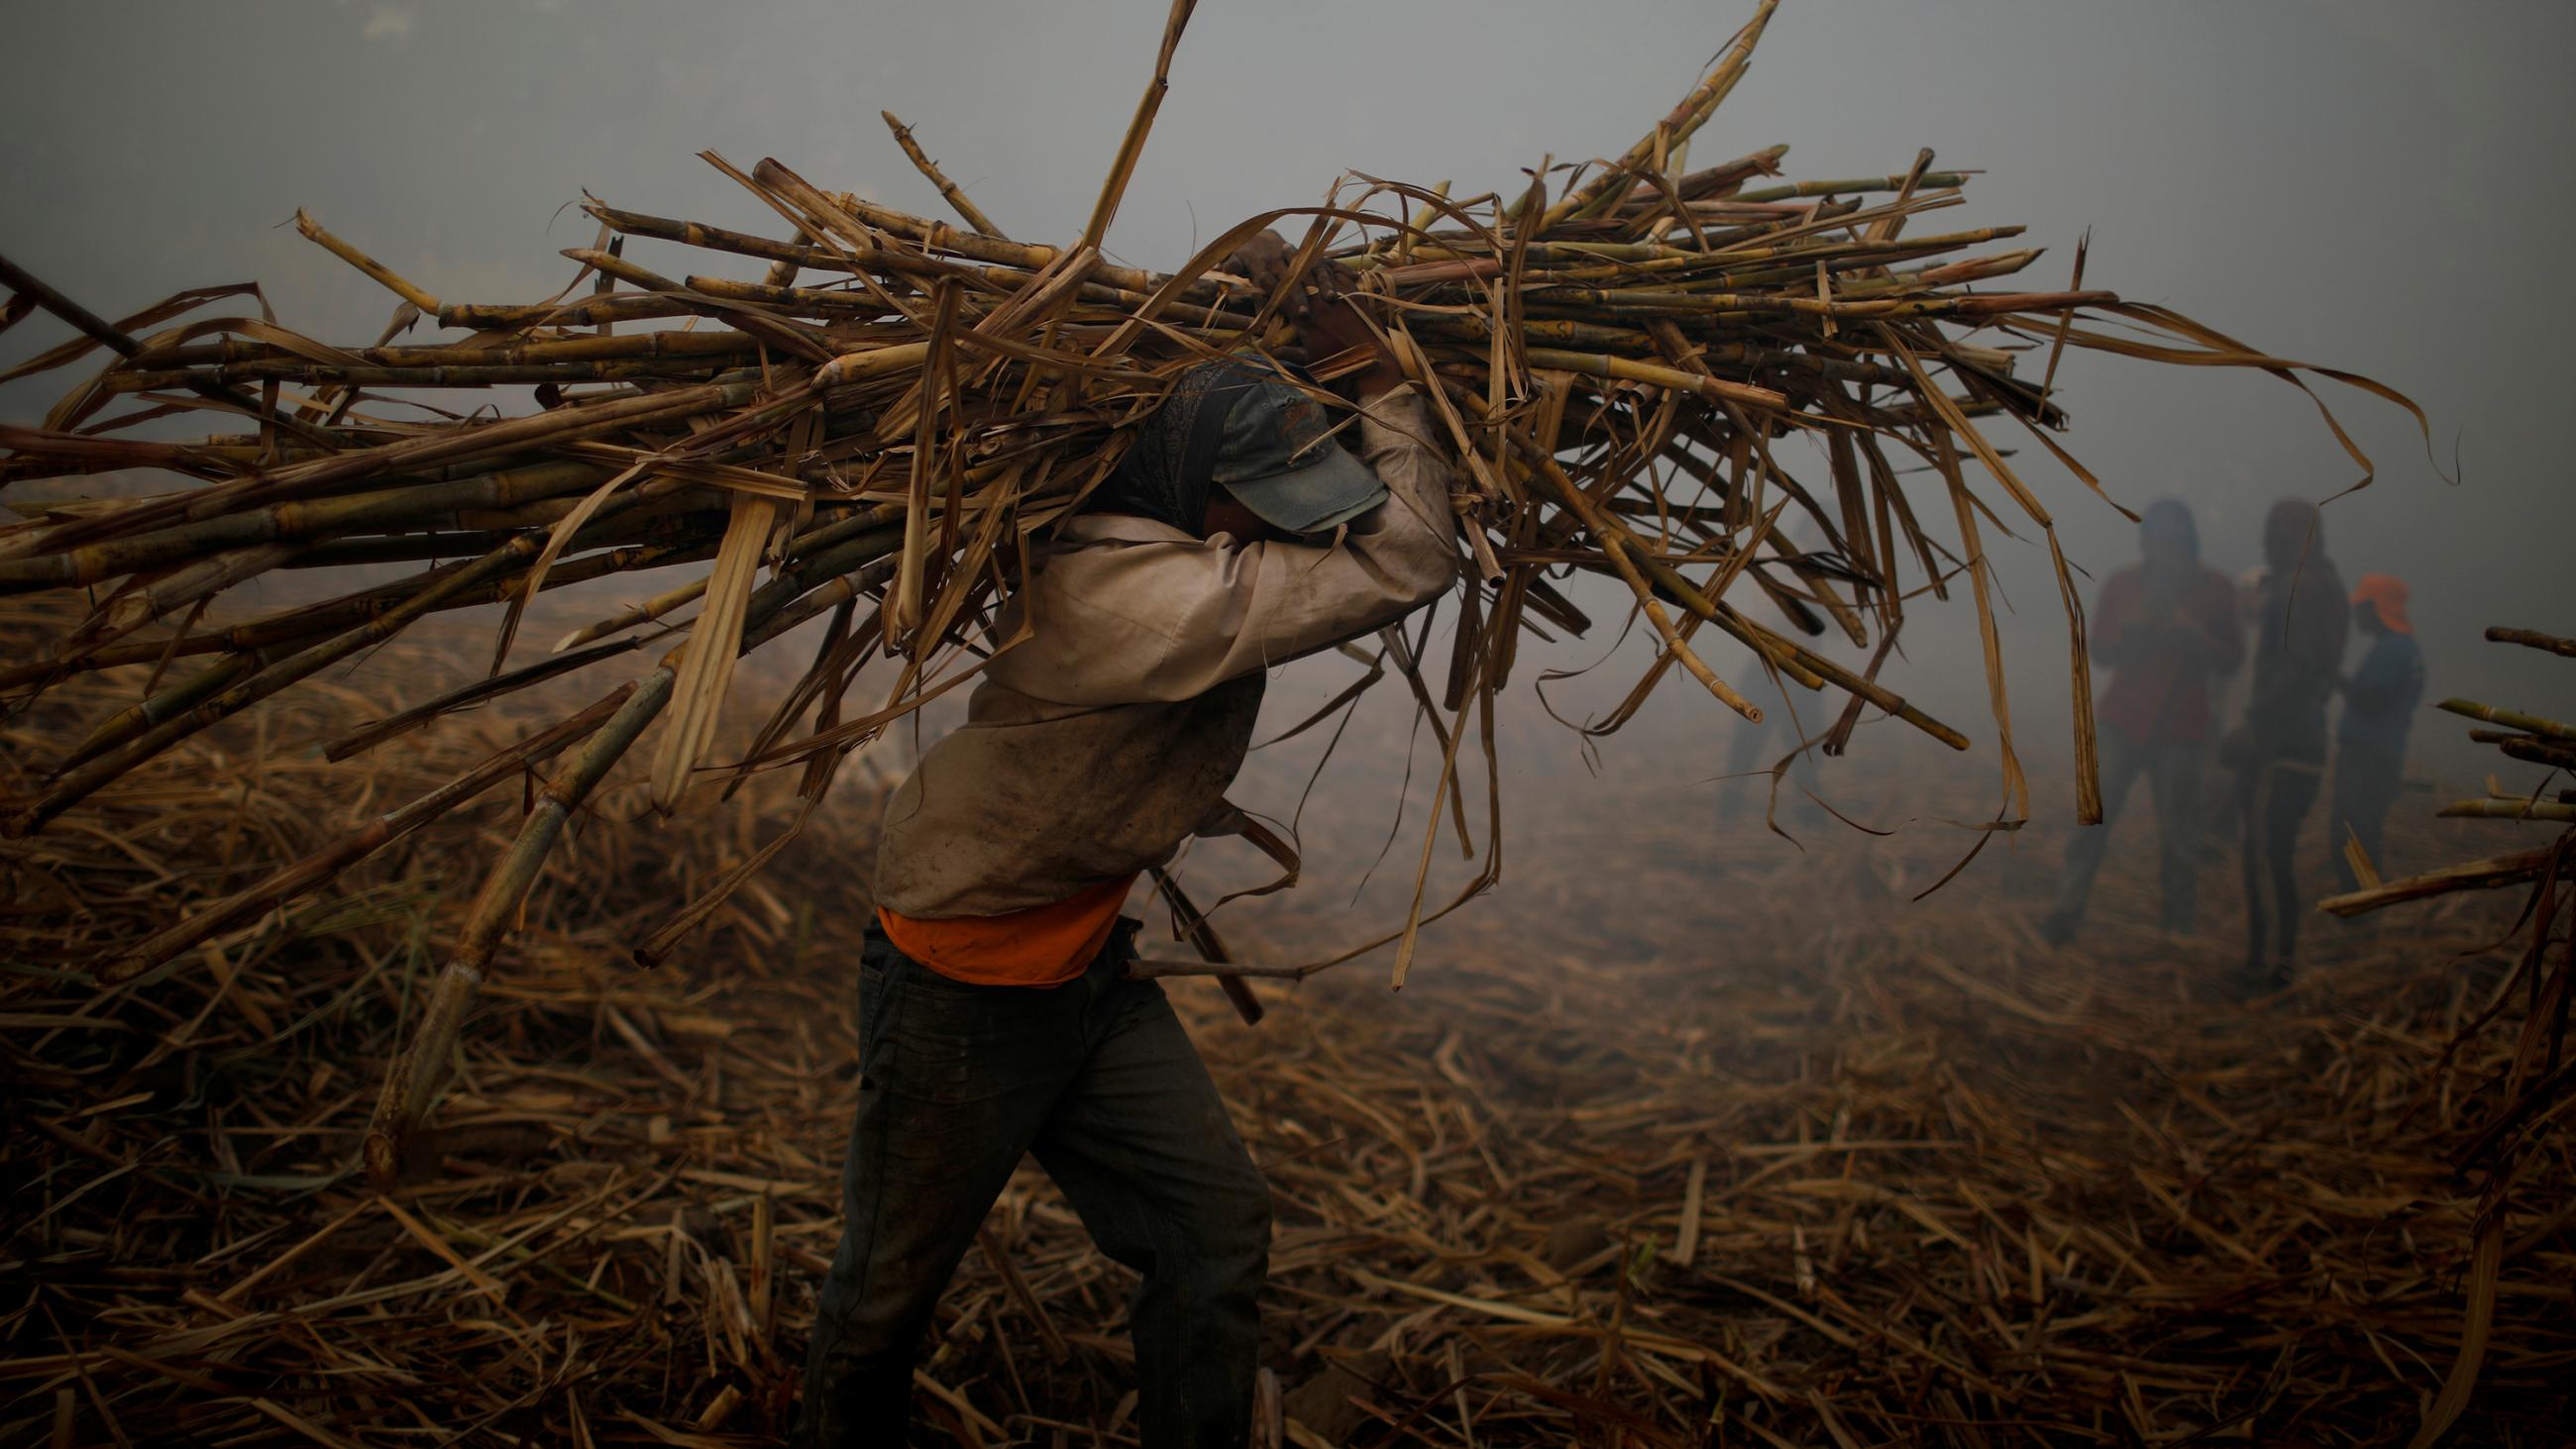 The photo shows a man carrying a huge bundle of canes on his shoulder through a smoky environment with several other workers standing in the background. 